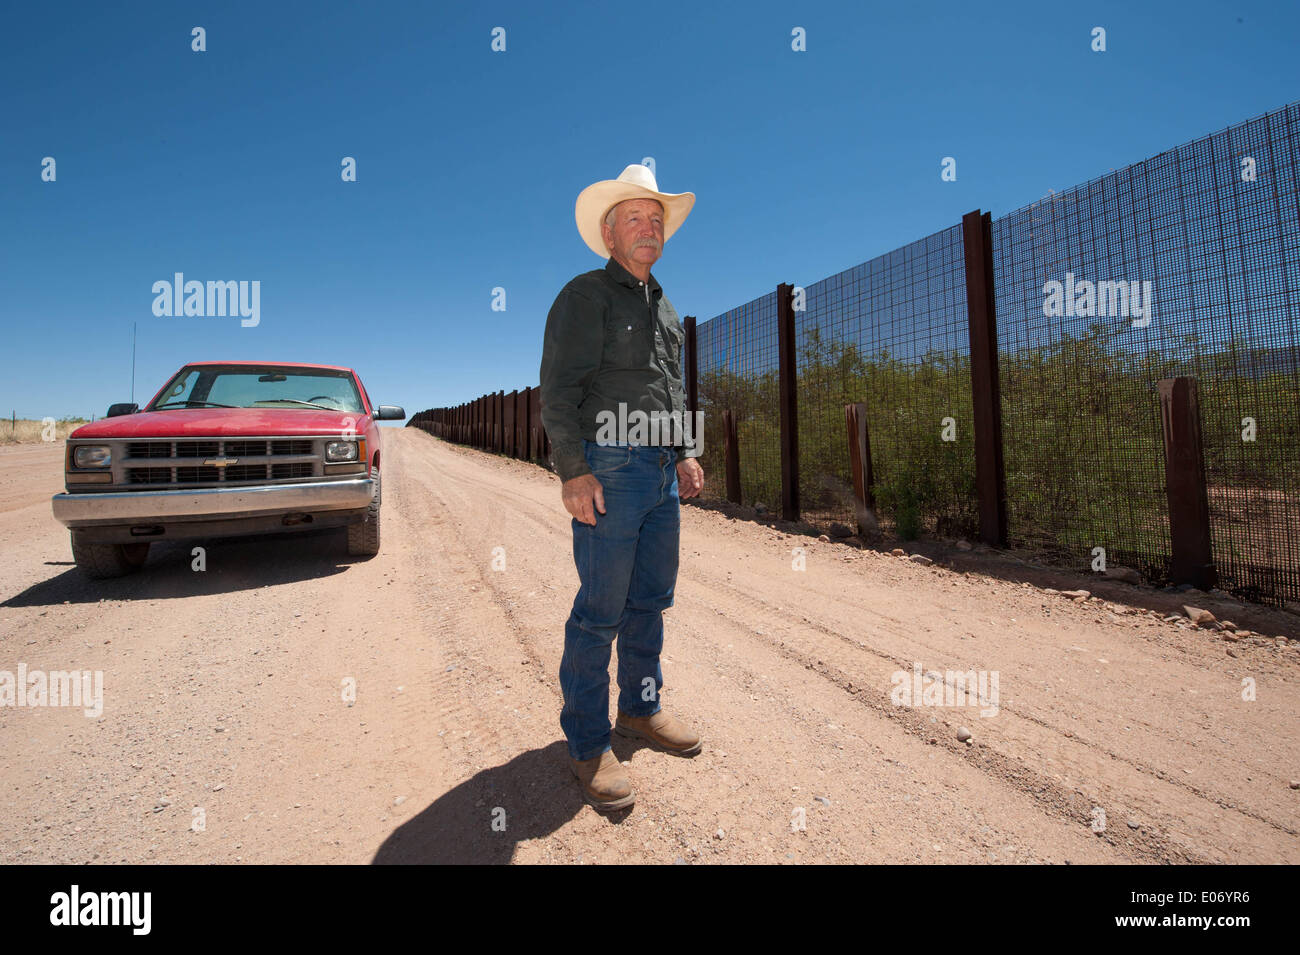 Naco, Arizona, USA. 28th Apr, 2014. Arizona cattle rancher JOHN LADD's ranch near Naco, Ariz., abuts the border fence separating the U.S. and Mexico. Over the years he's had problems caused by both smugglers and U.S. Border Patrol agents including damage to his property, livestock and grass. © Will Seberger/ZUMAPRESS.com/Alamy Live News Stock Photo